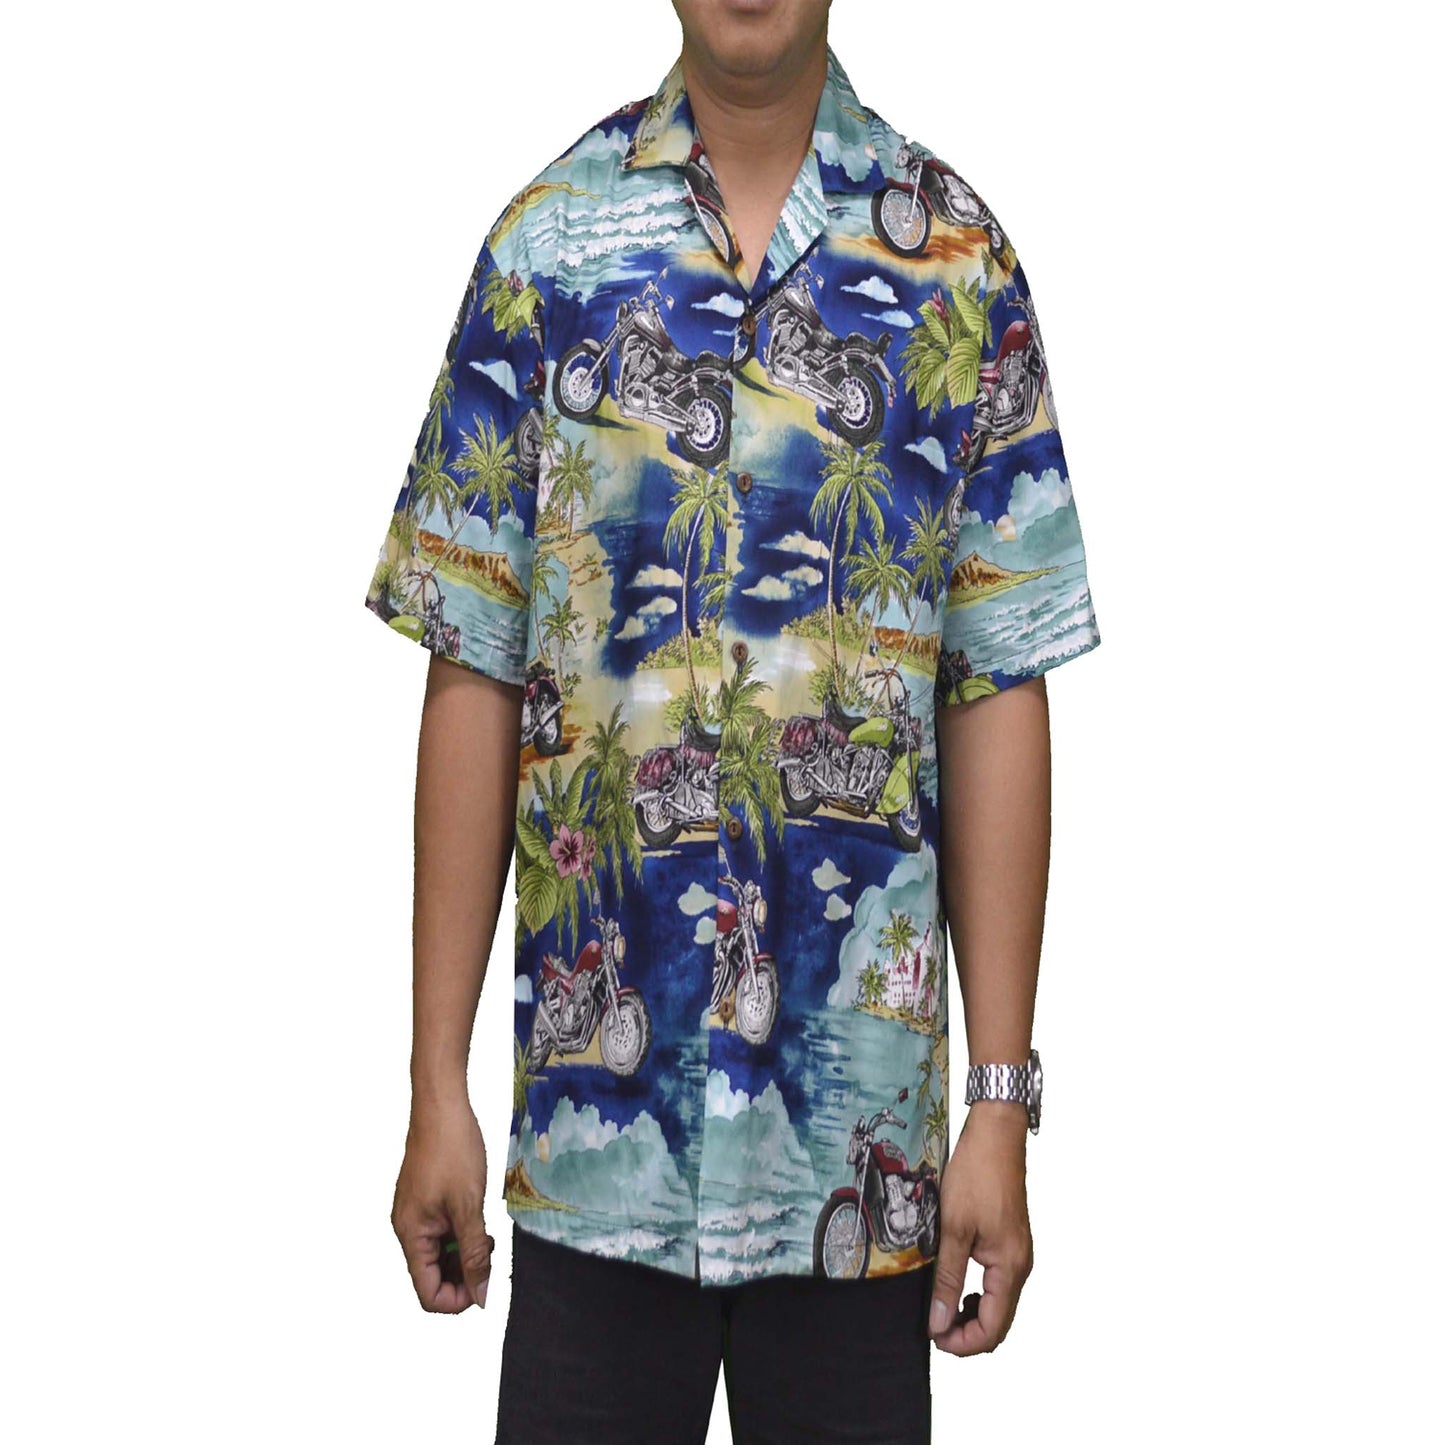 authentic hawaiian cotton shirt from honolulu with motorcycle scene